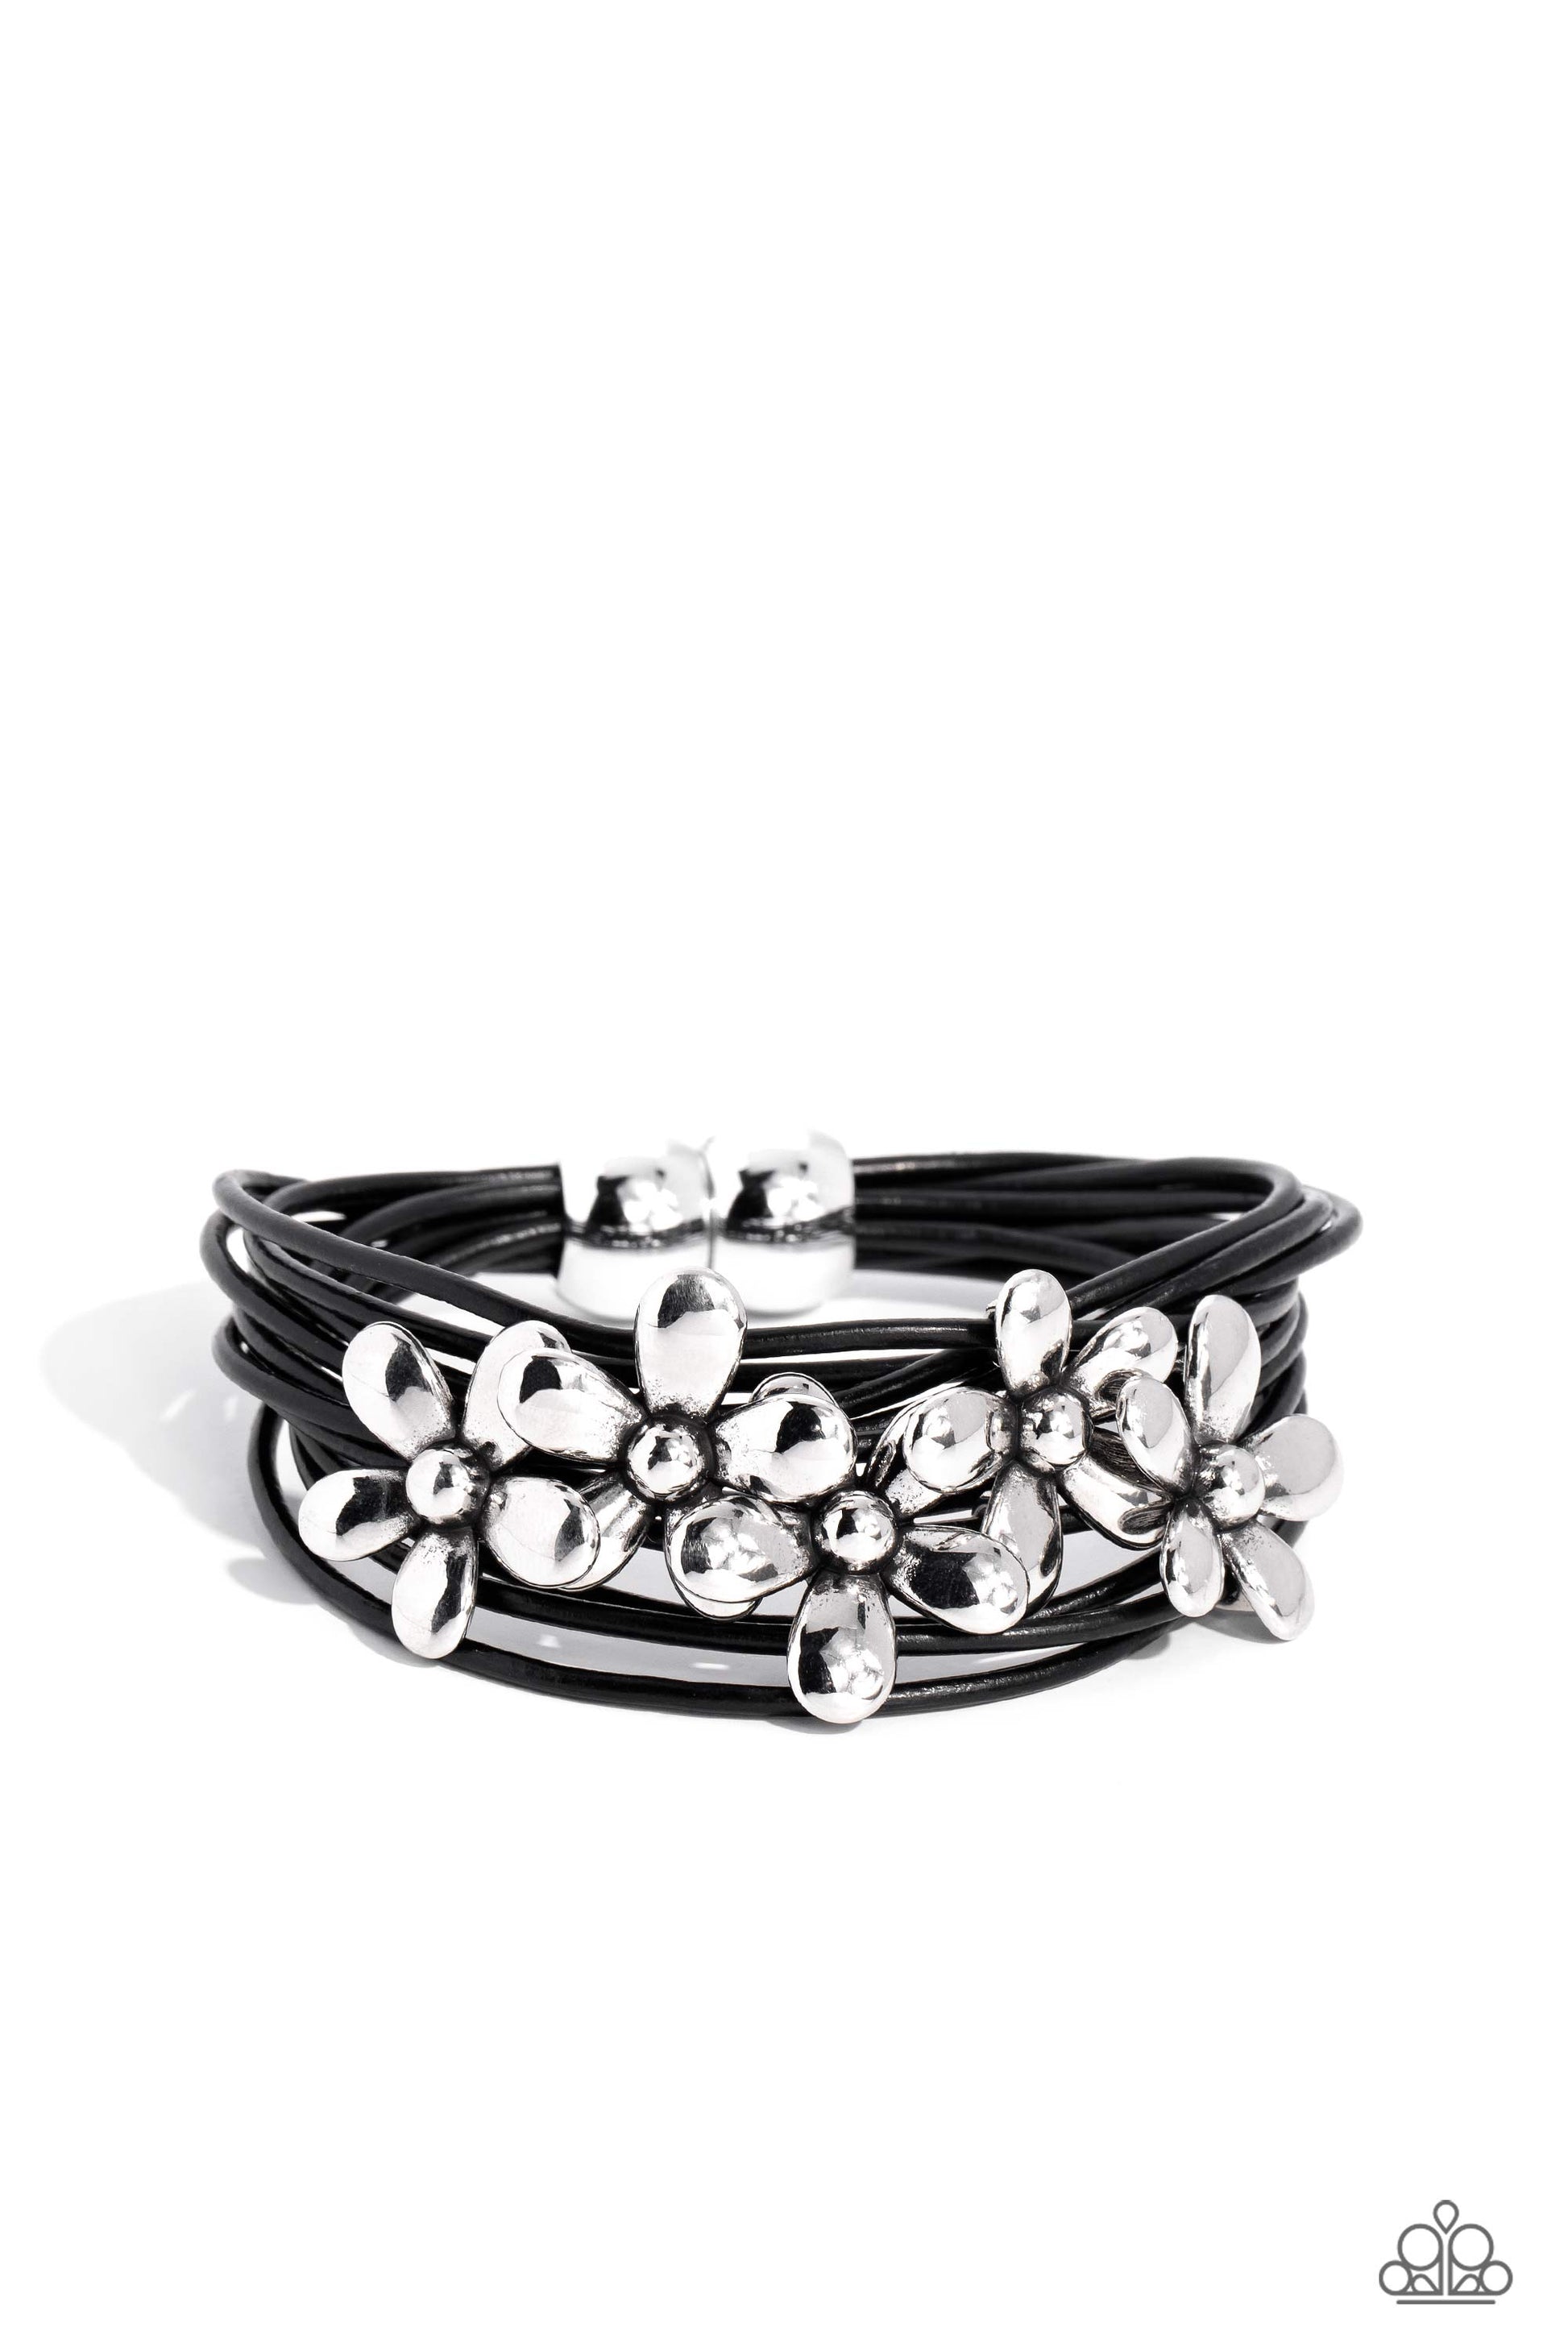 Shiny silver flowers glide along leathery black cords, clustering into a shimmery floral statement piece at the center of the wrist. Features a magnetic closure.  Sold as one individual bracelet.